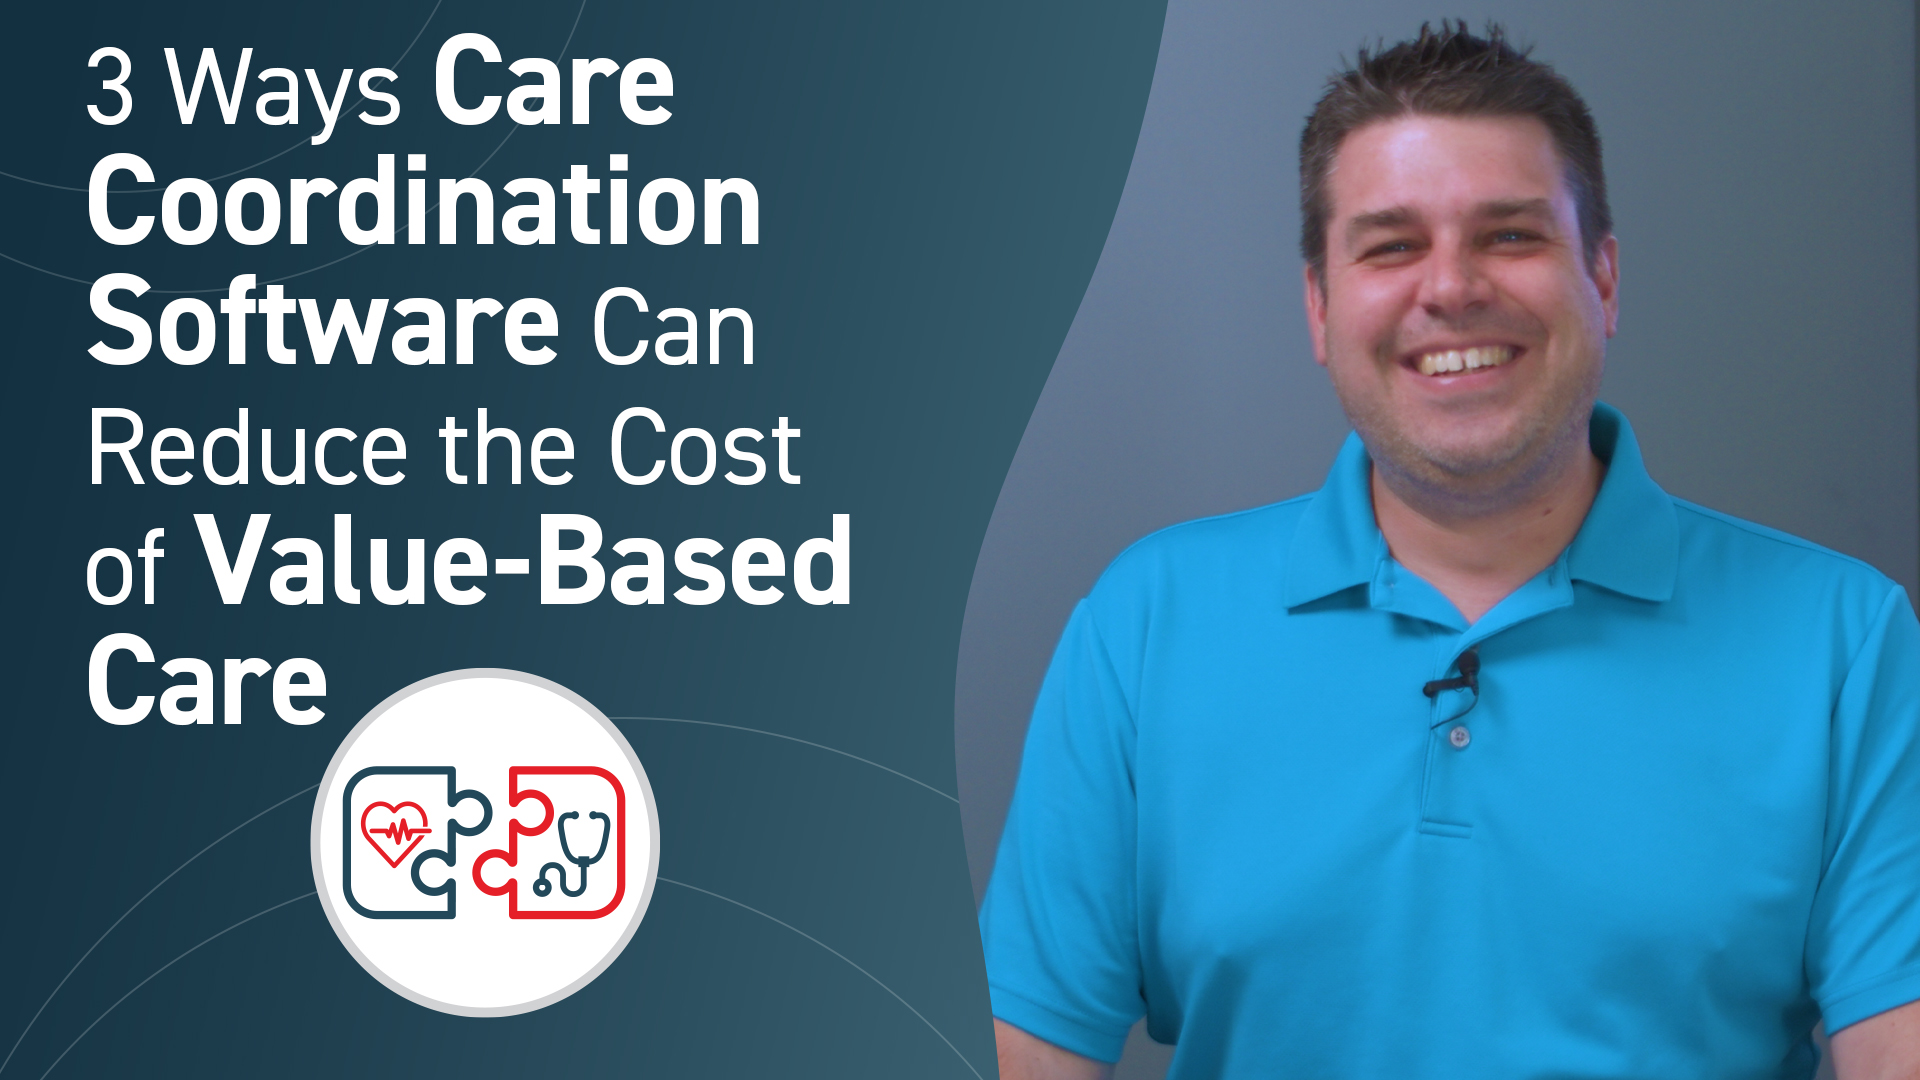 3 Ways Care Coordination Software Can Reduce the Cost of Value-Based Care